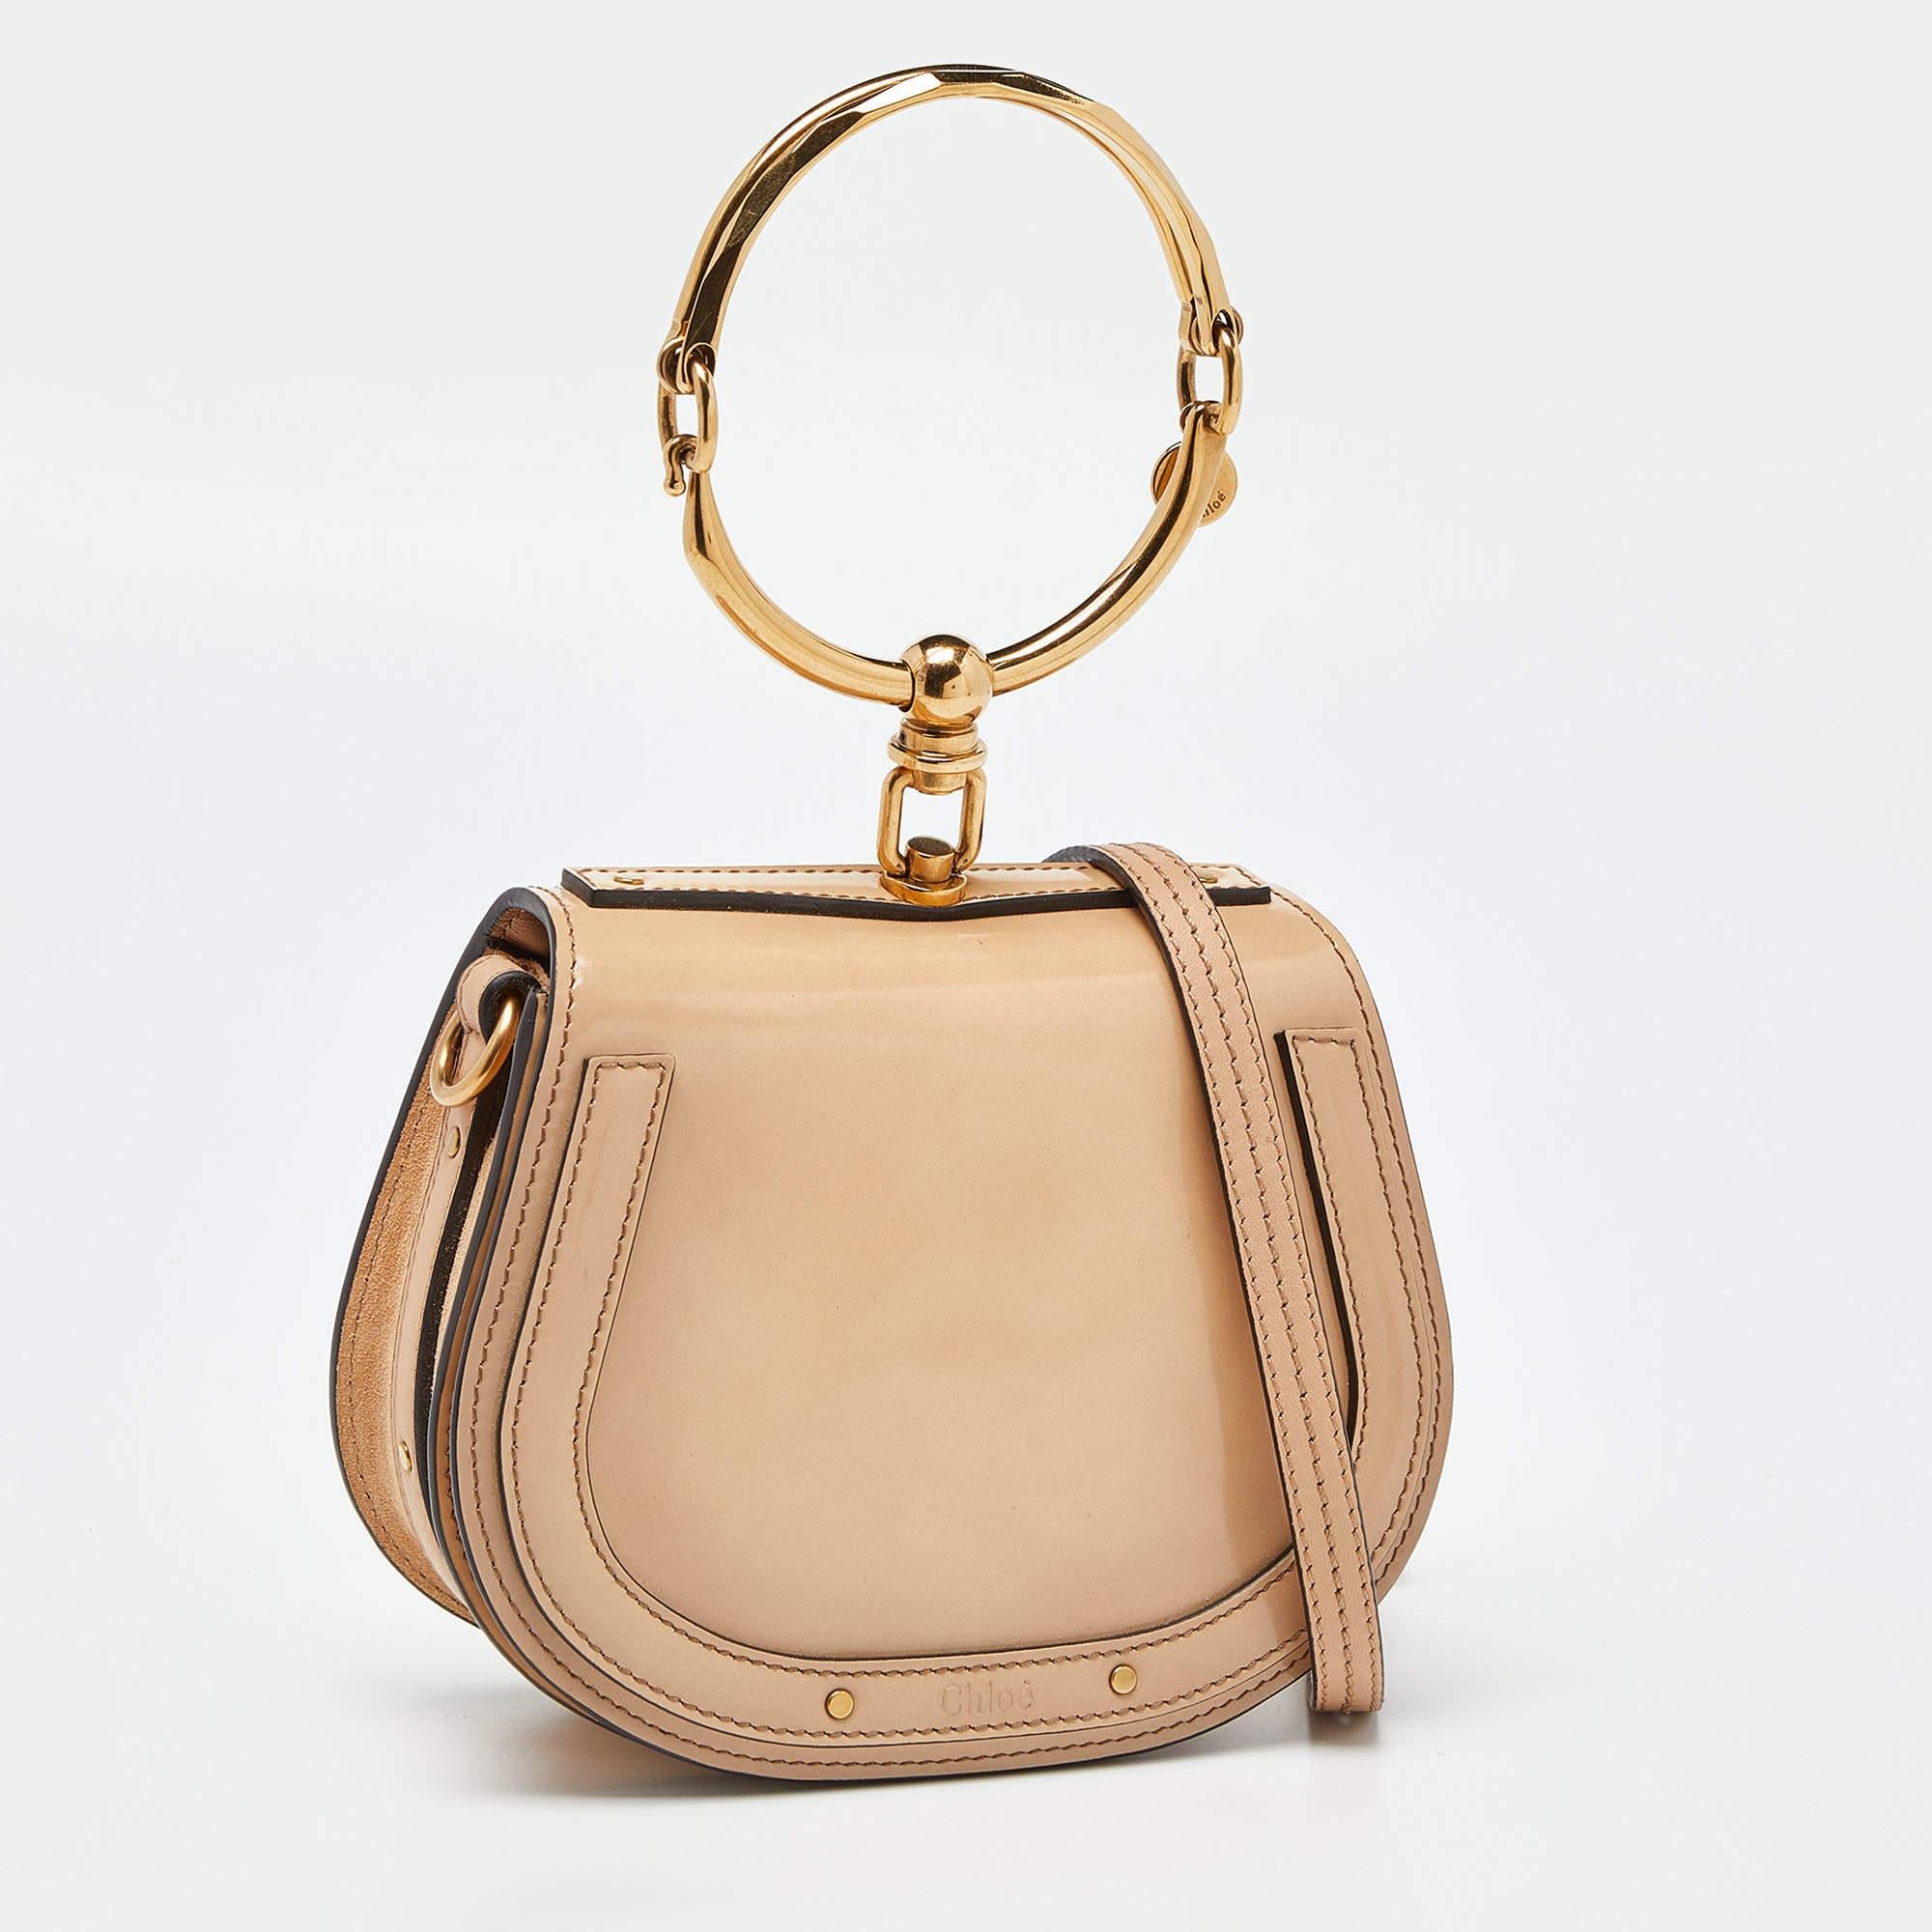 The Chloé Nile Bag is a luxurious and stylish accessory. Crafted from patent leather, it features intricate stud detailing and a unique bracelet handle. This compact crossbody bag exudes elegance and is perfect for carrying essentials while making a